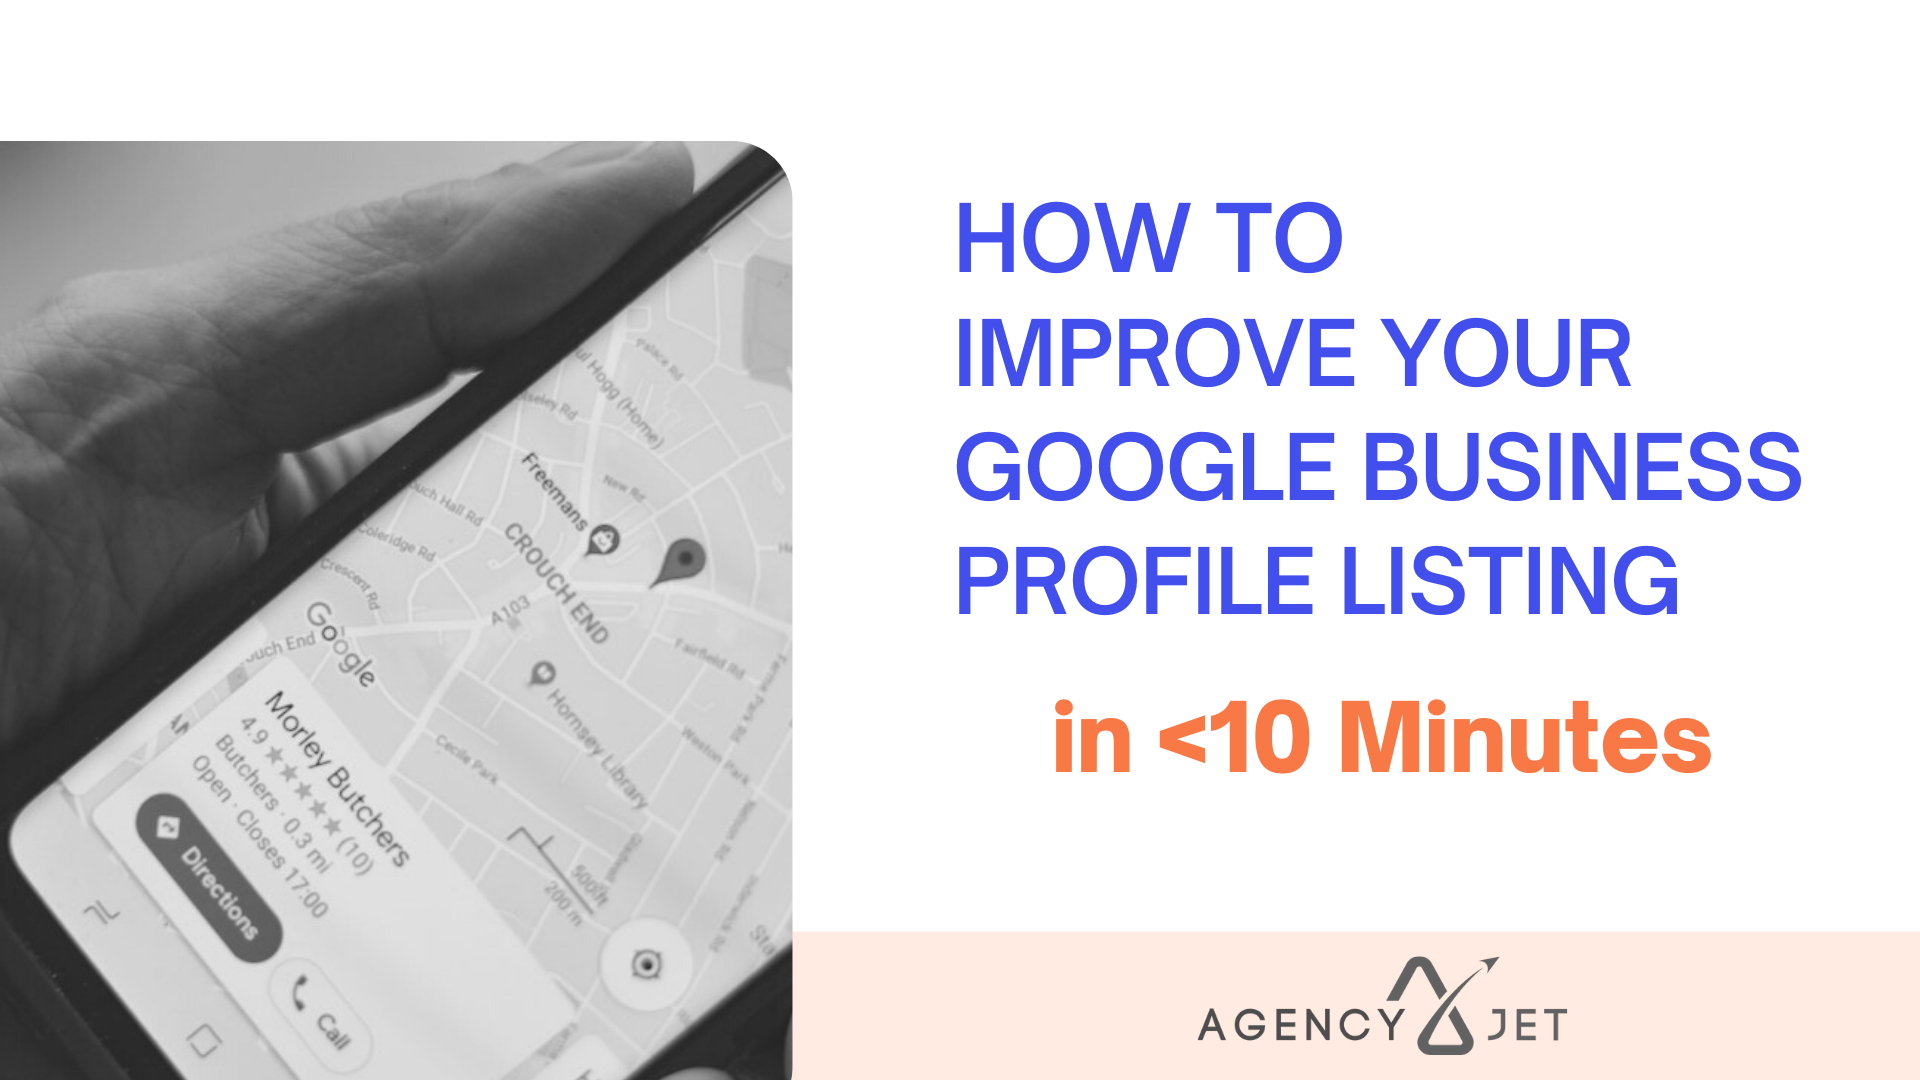 How To Improve Your Google Business Profile Listing in 10 Minutes - Agency Jet